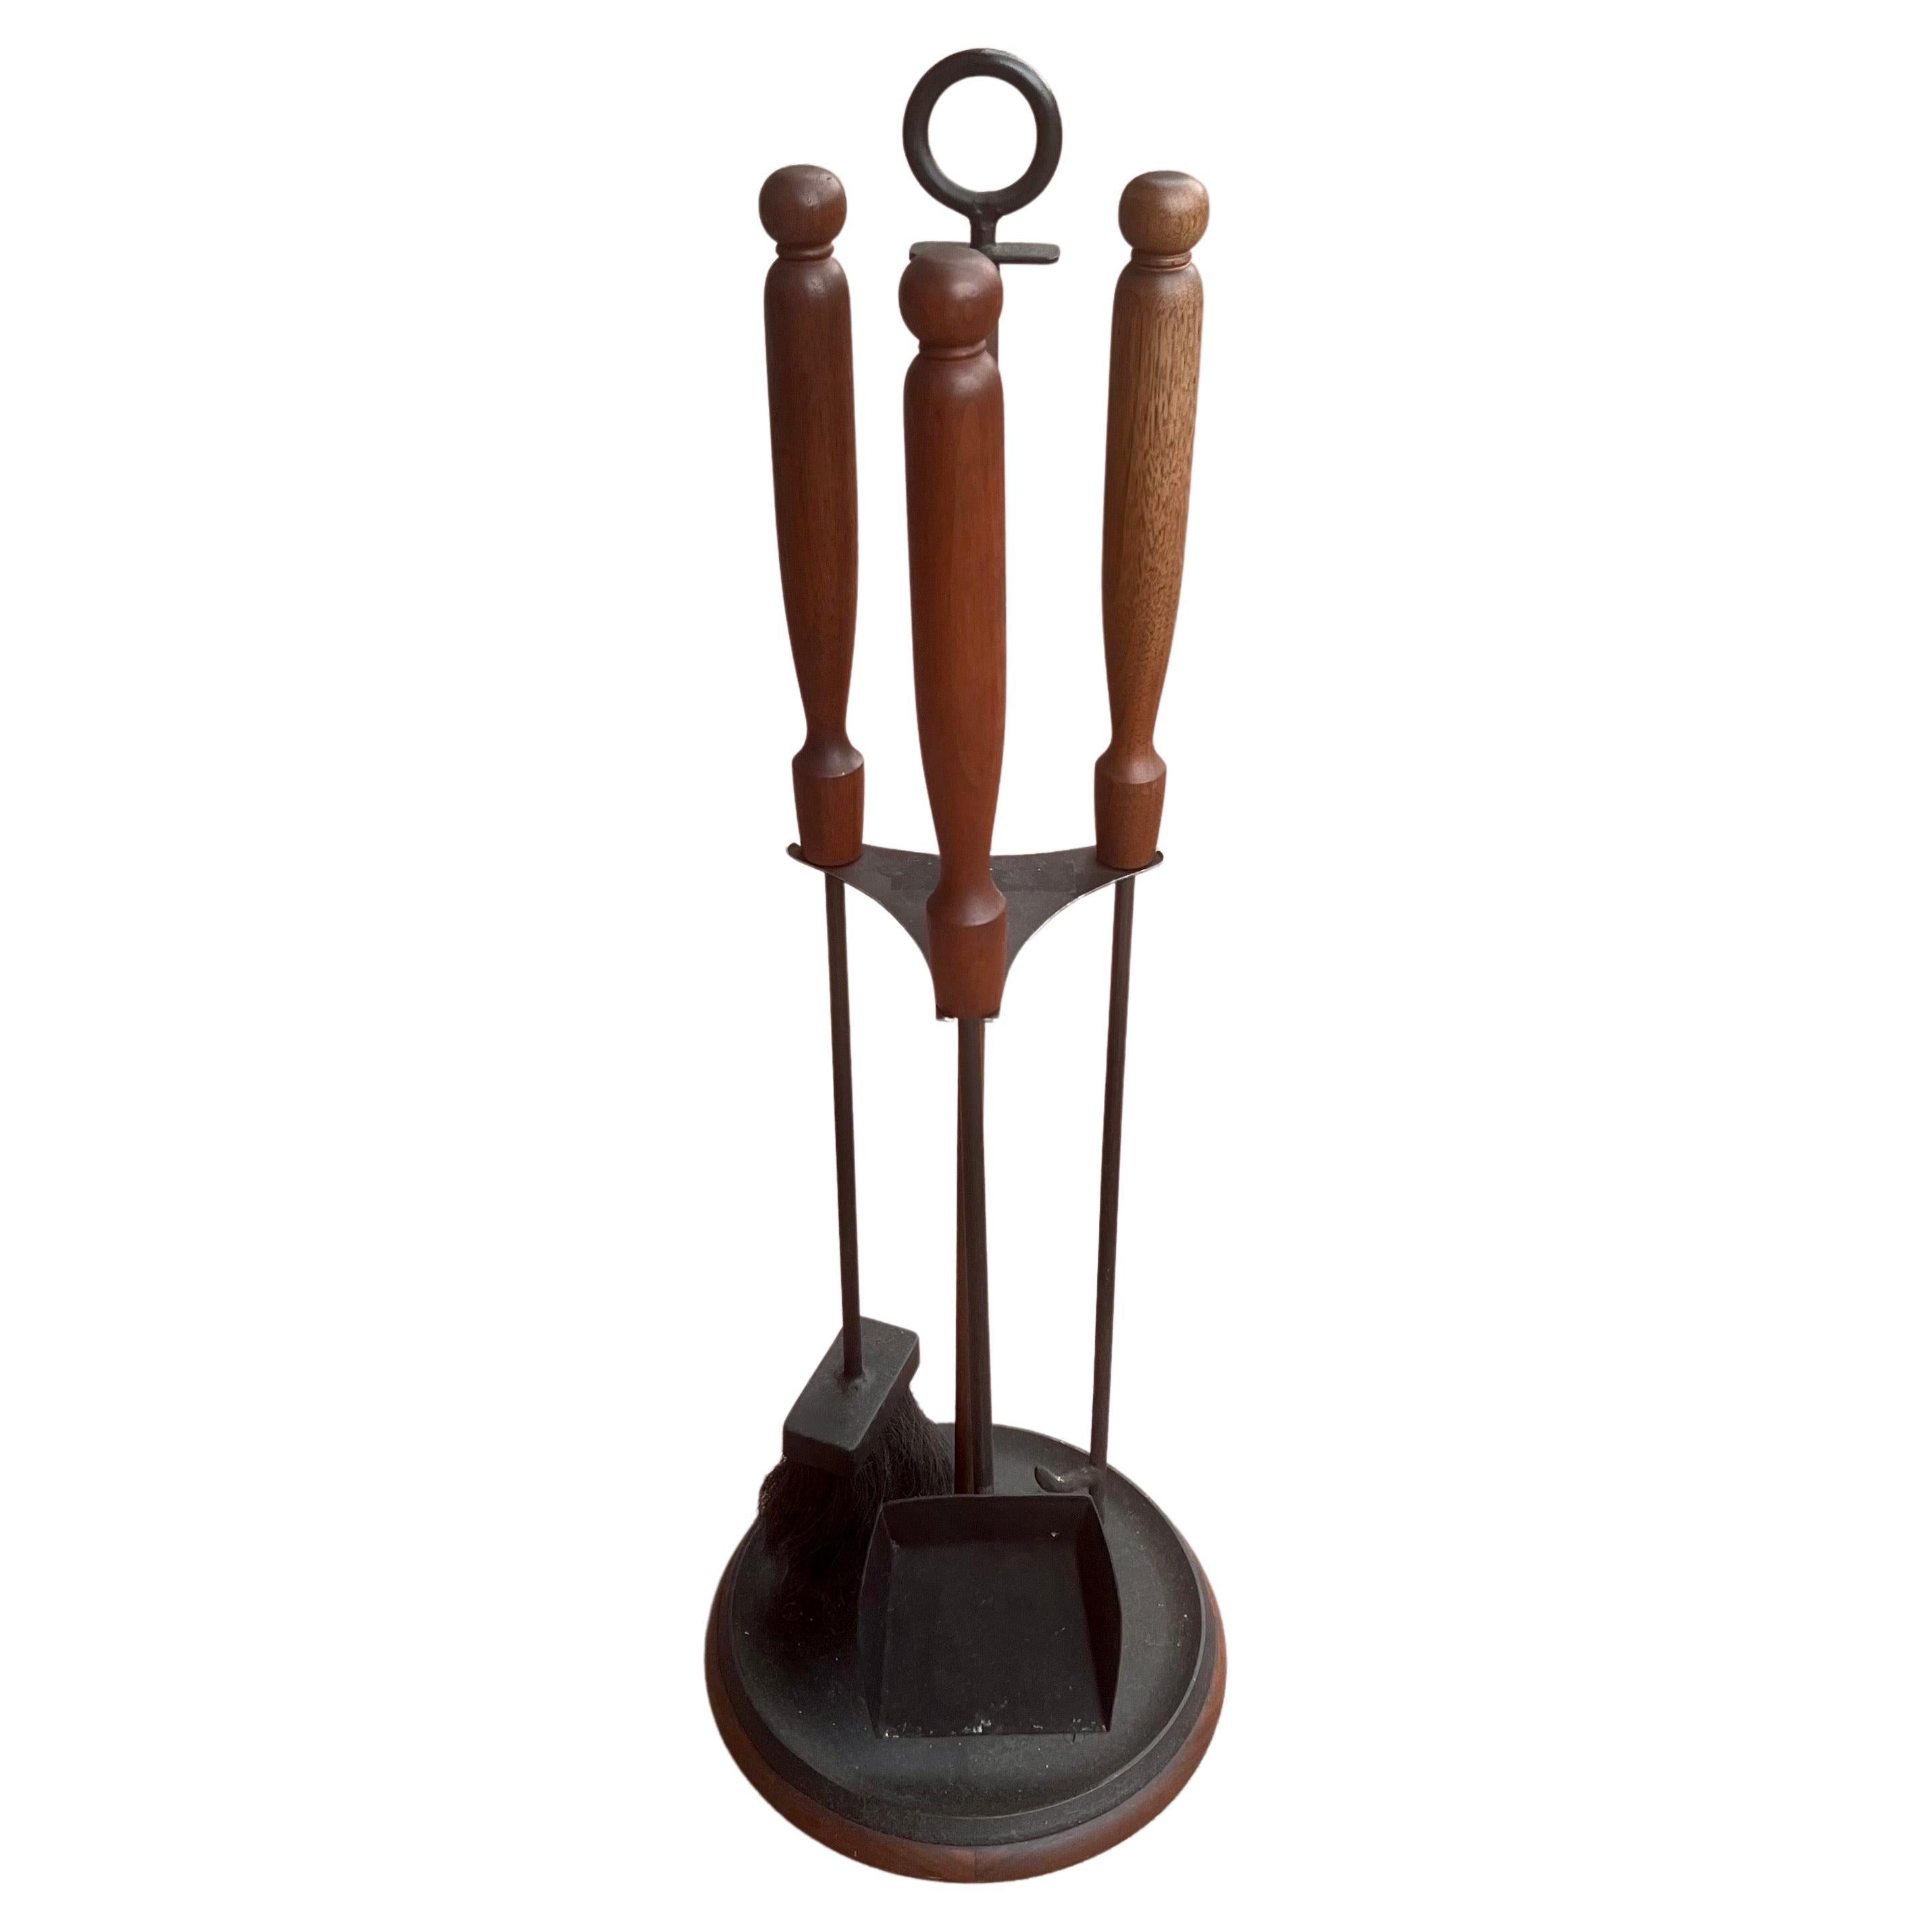 Striking rare solid walnut and iron combo, on these rare fireplace tools set the very unique base with solid walnut bottom, circa 1950s.